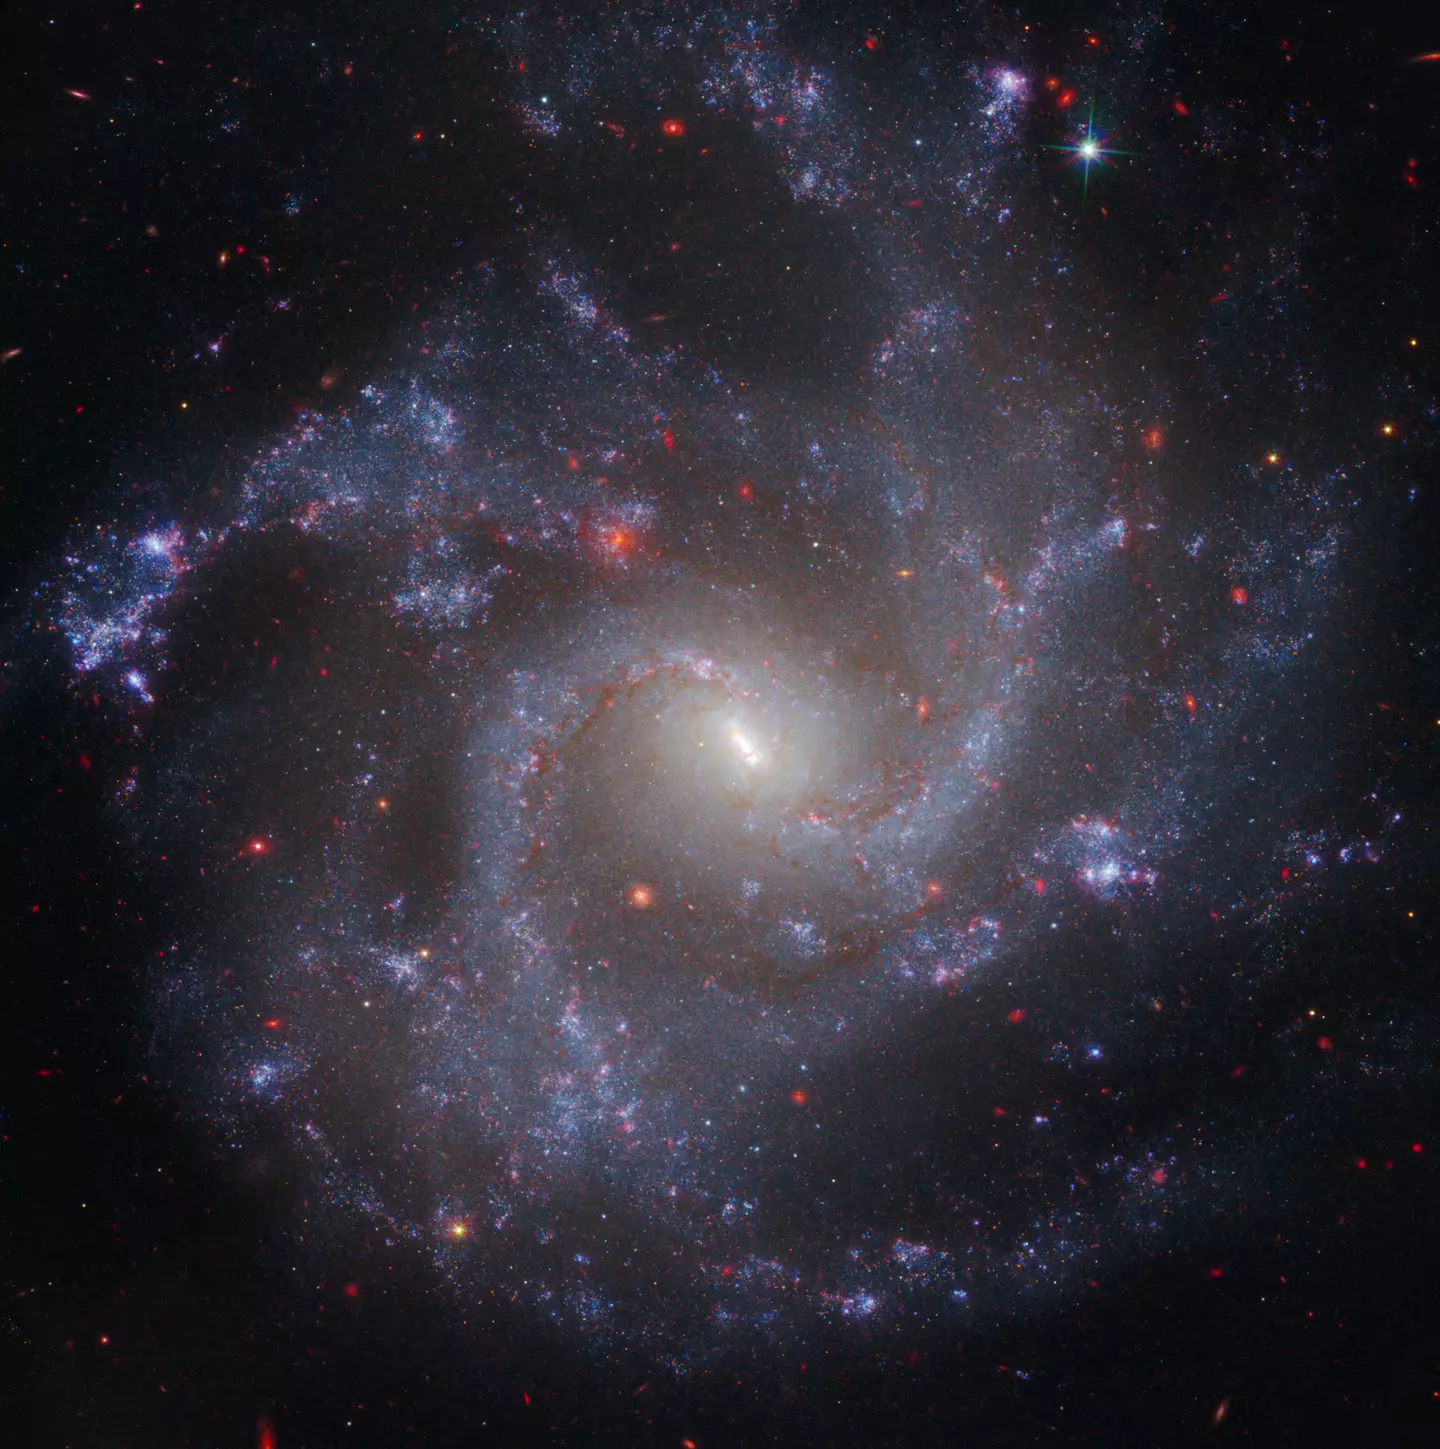 One of the images from the telescope.